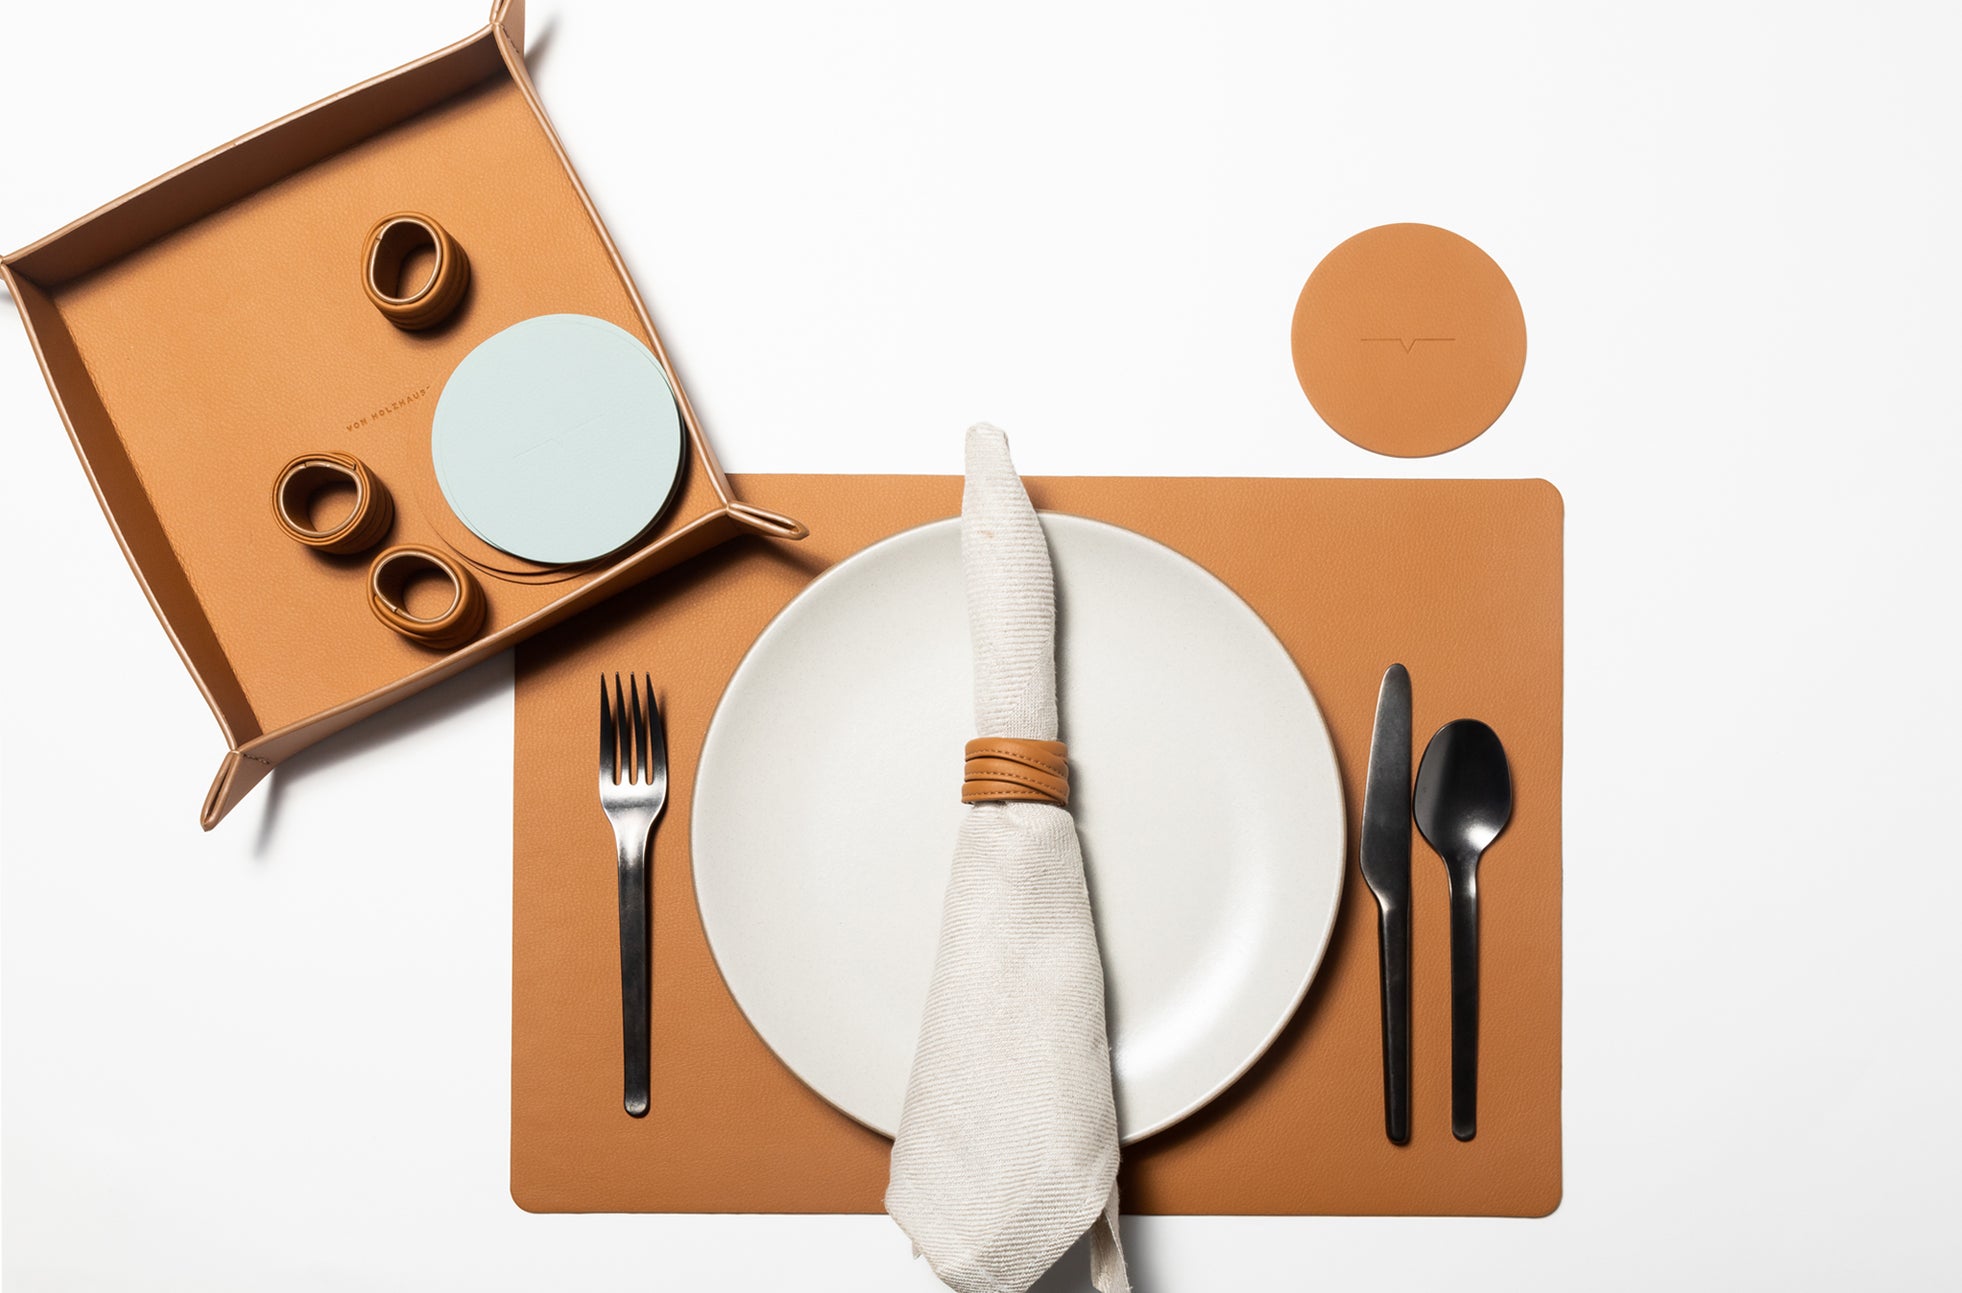 The Placemat Set - Sample Sale in Technik in Caramel & Sea image 4